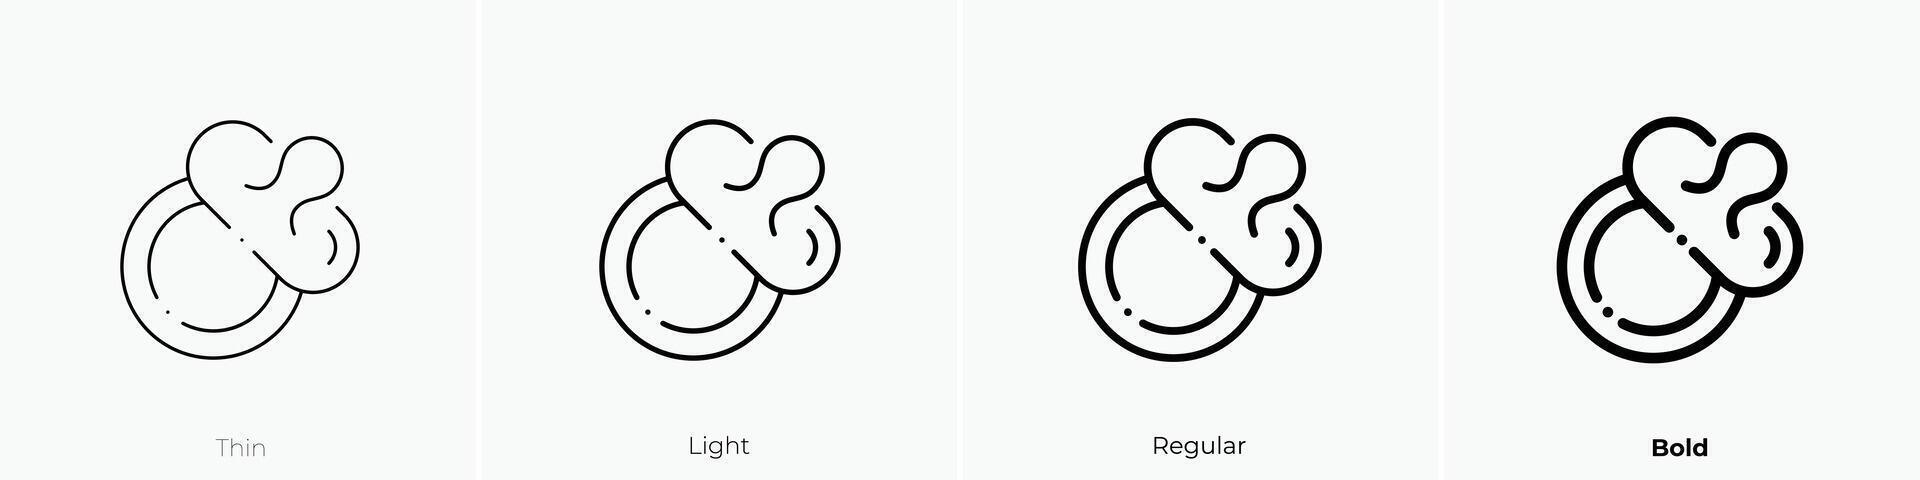 pacifier icon. Thin, Light, Regular And Bold style design isolated on white background vector